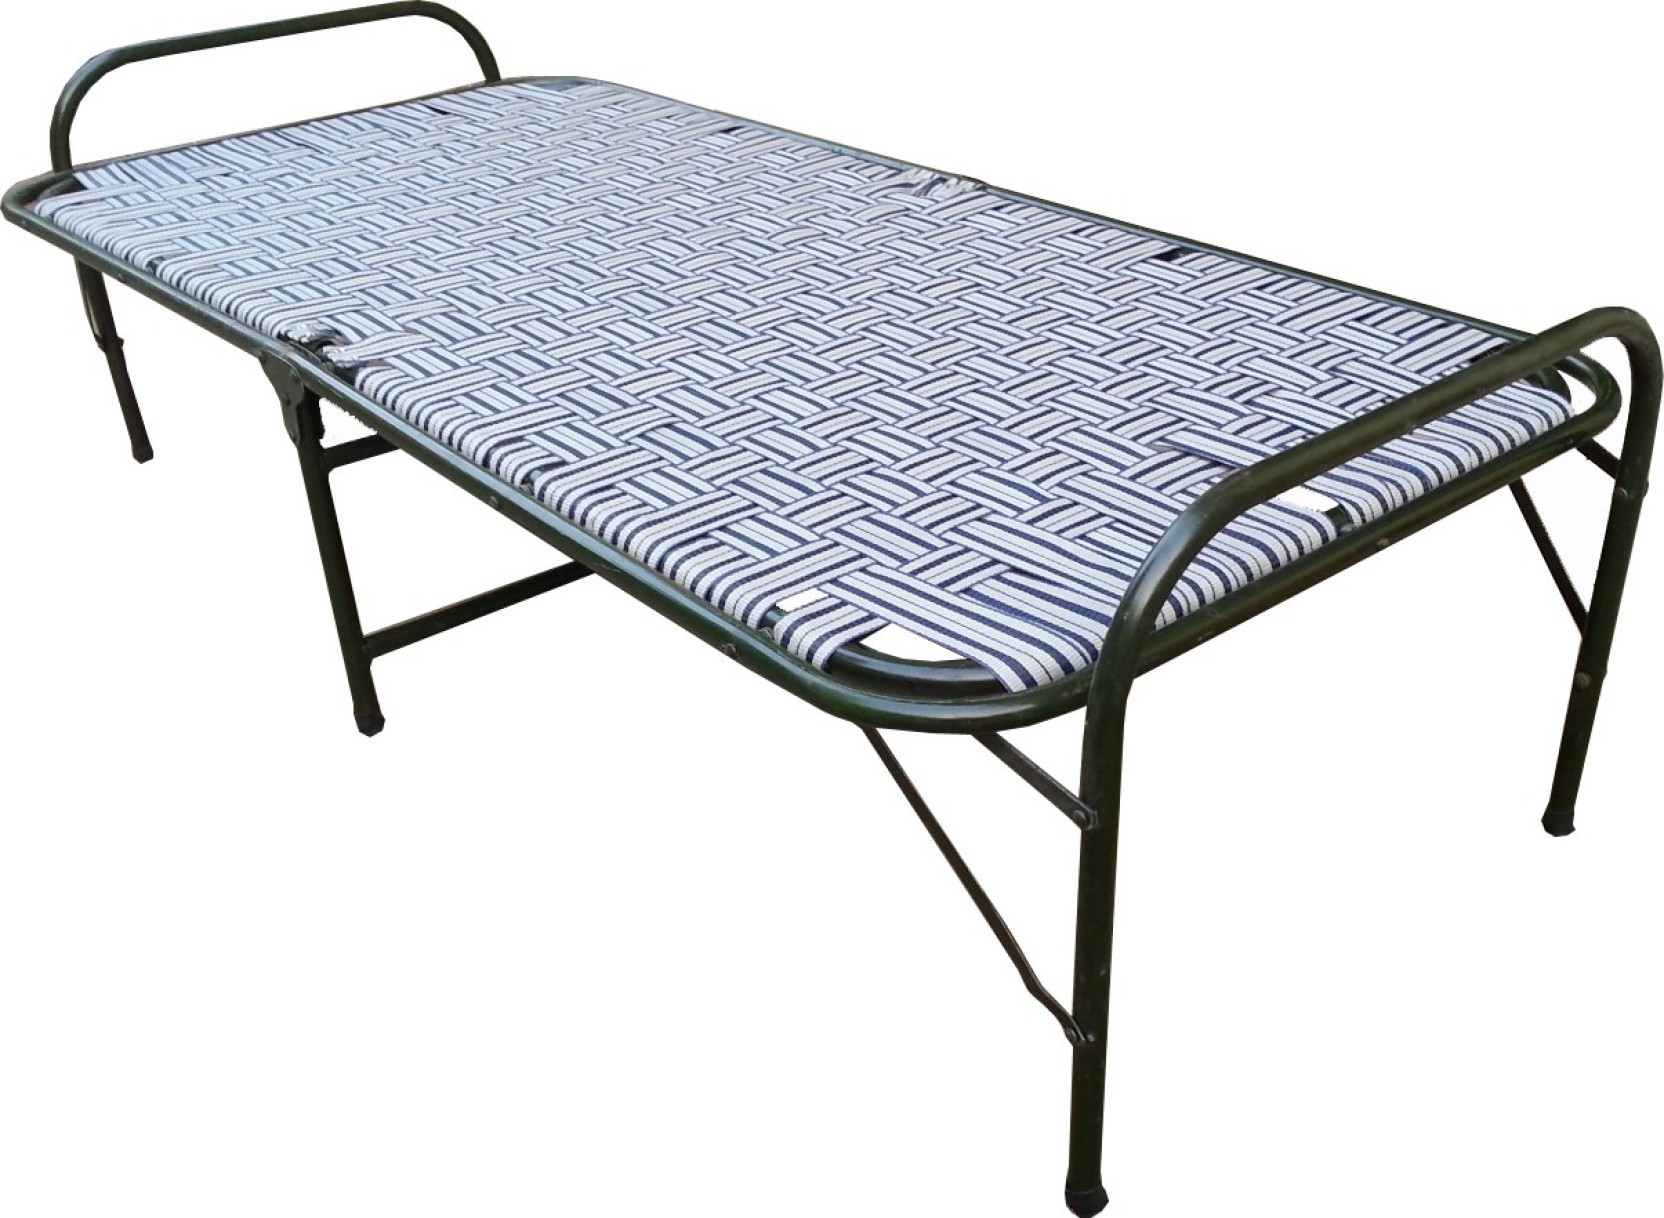 metal beds with mattress india